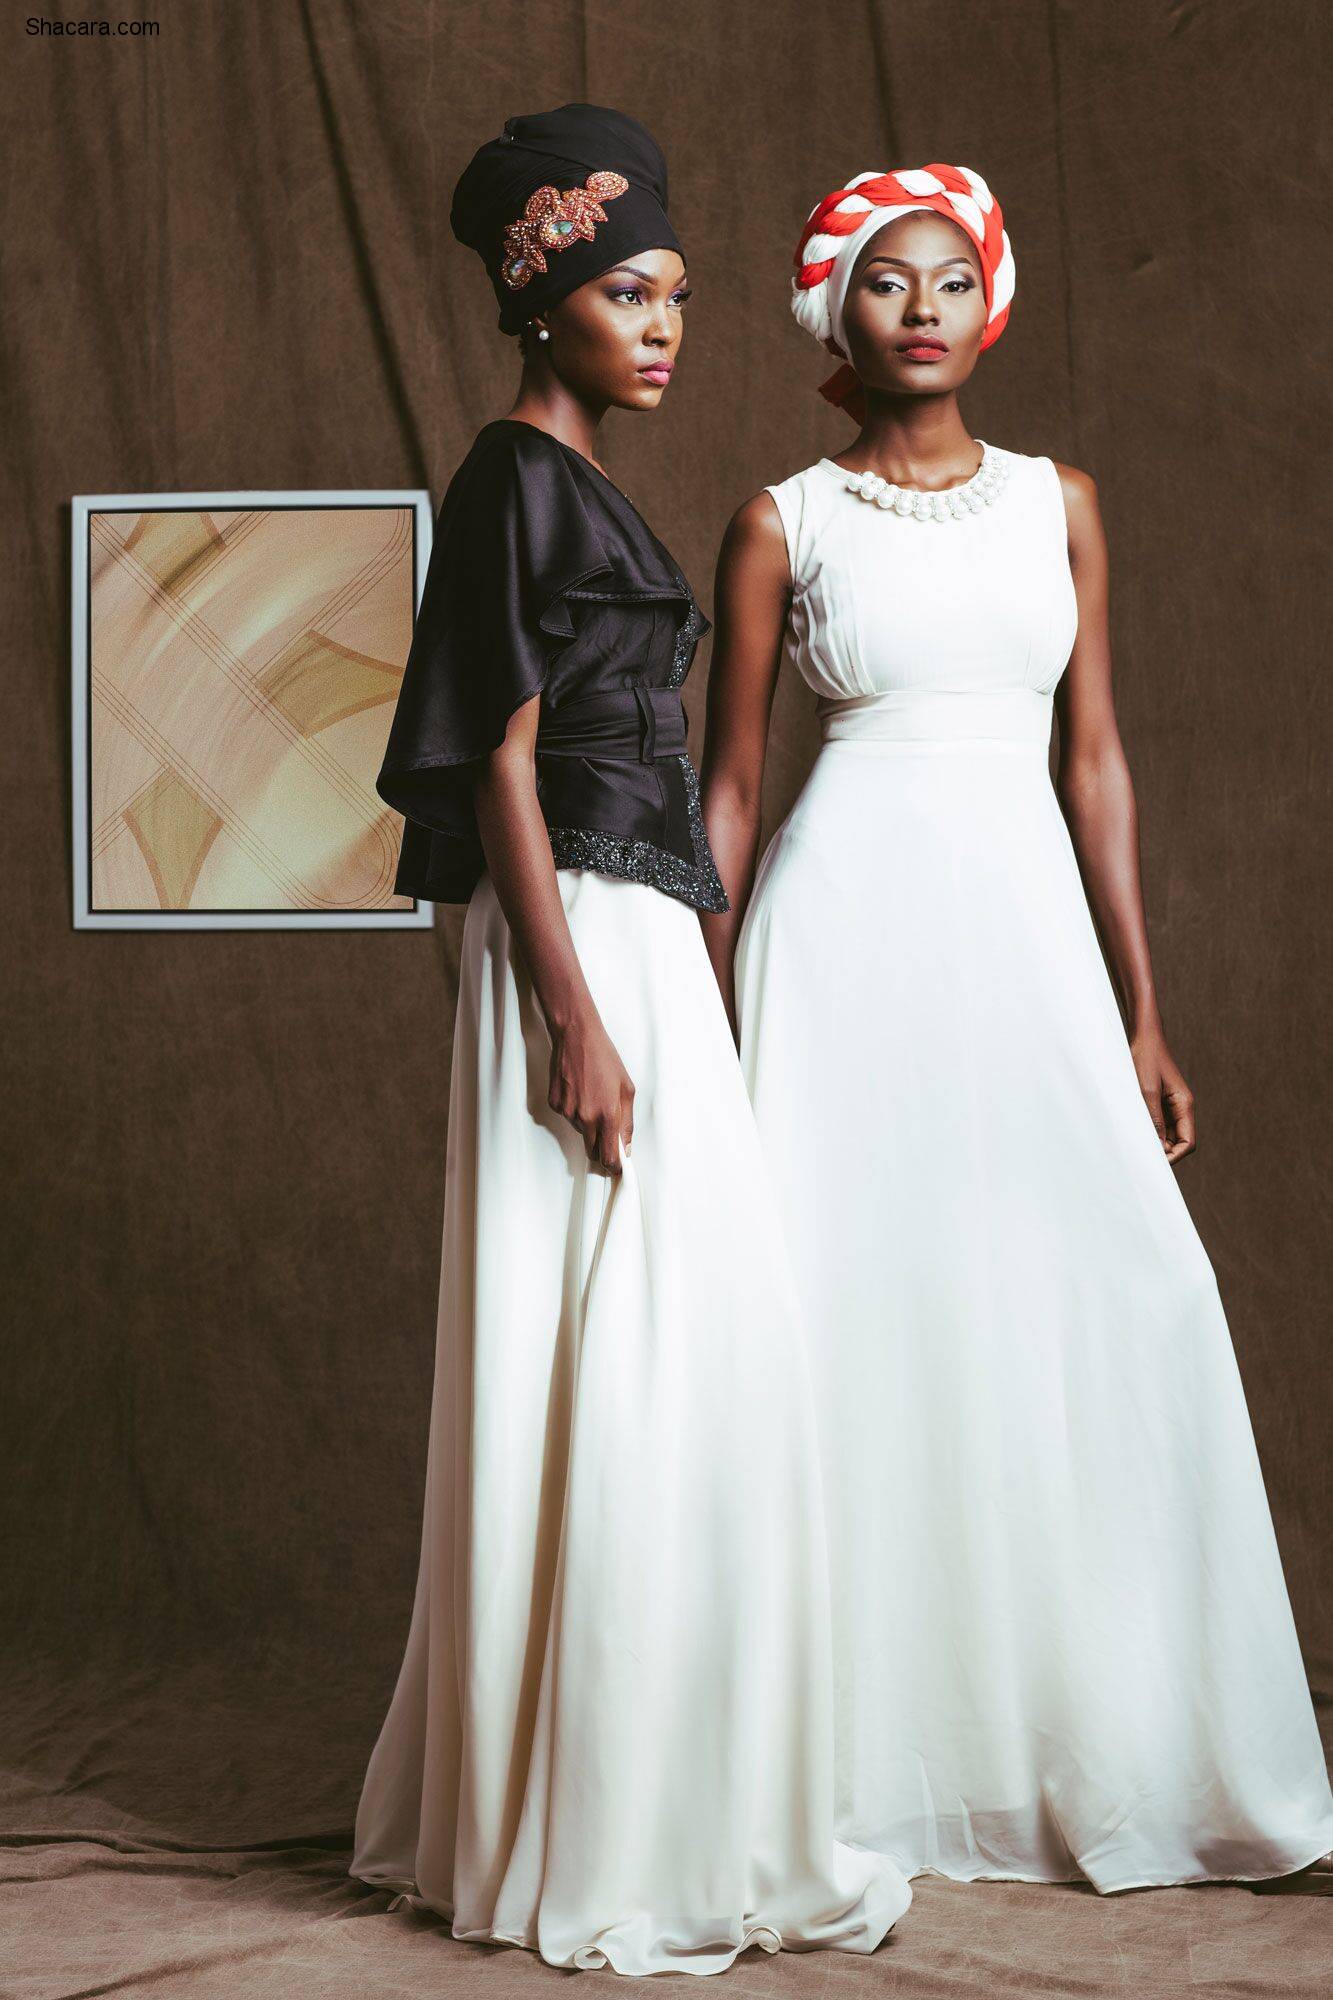 House of Kaya Presents The Spring/Summer 2016 Look Book For The Arewa Diamond Collection